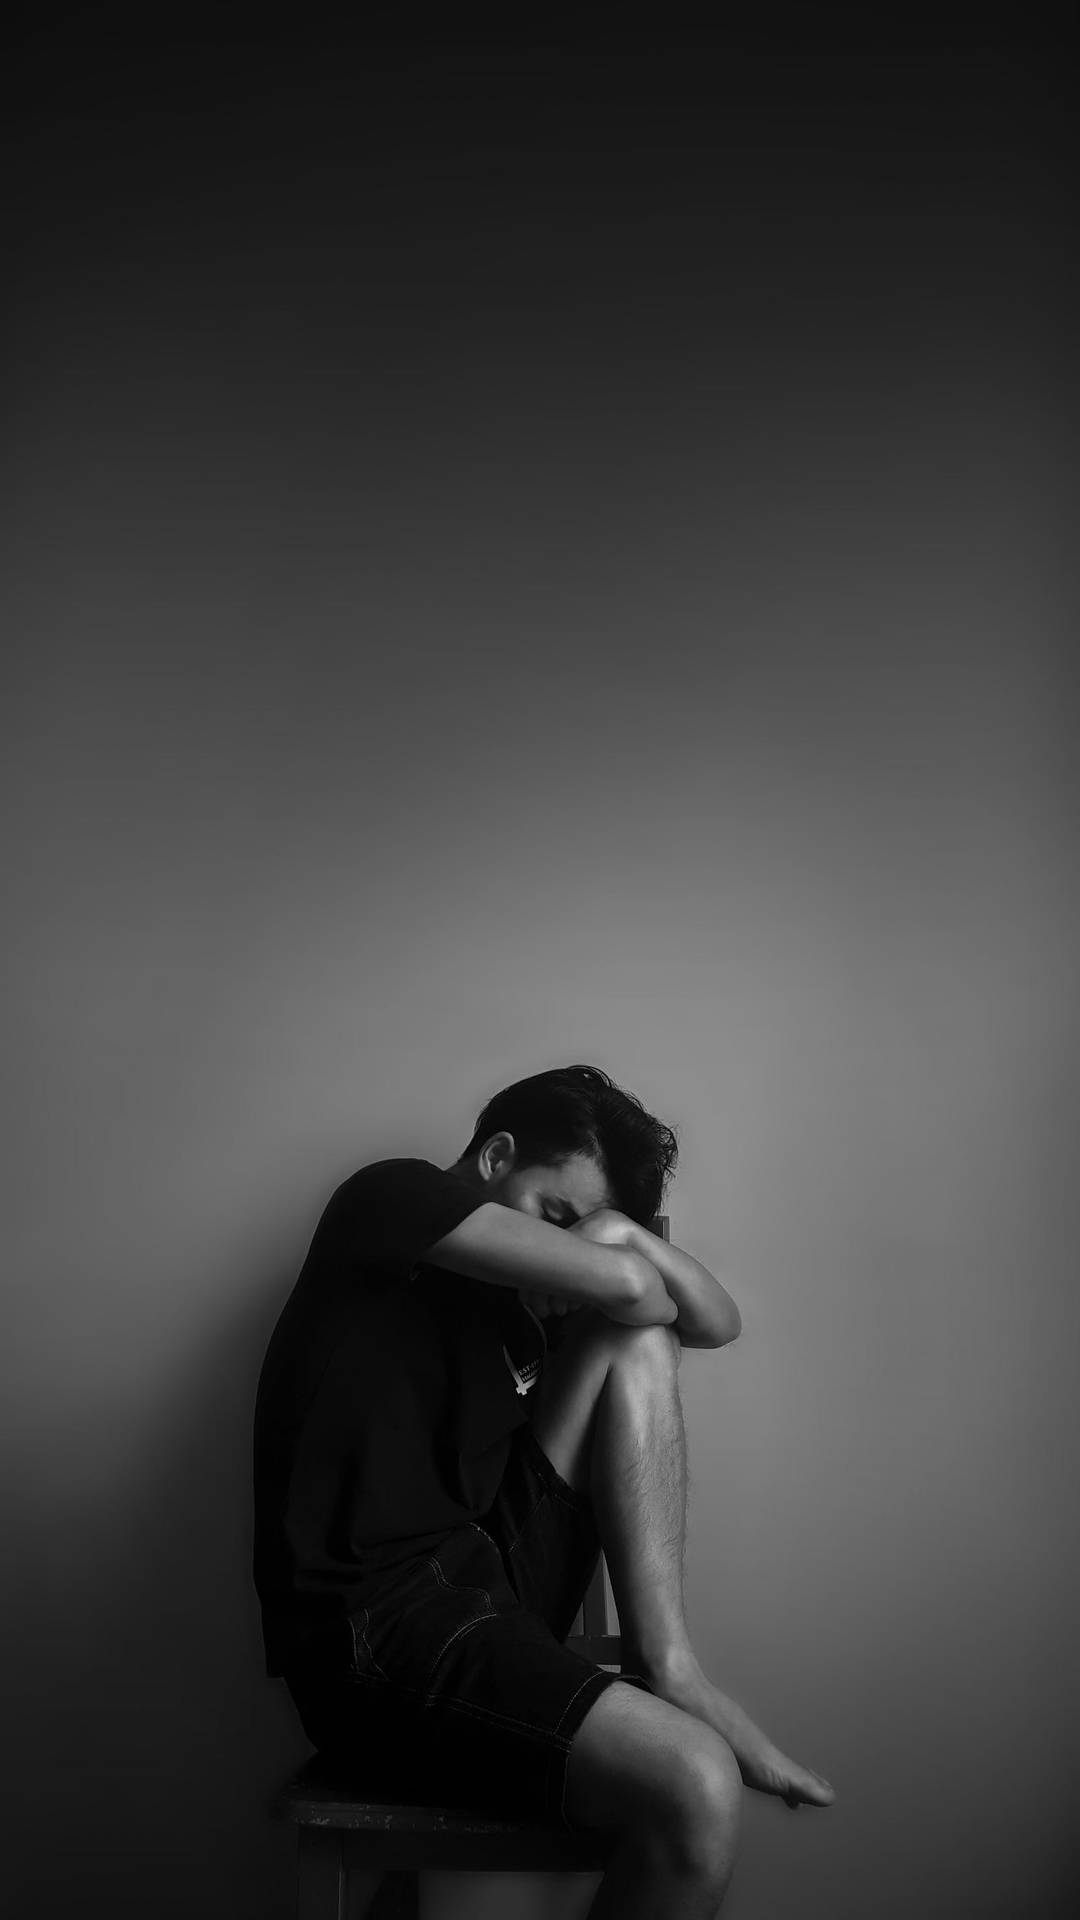 Lonely Man Leaning Against A Wall Wallpaper